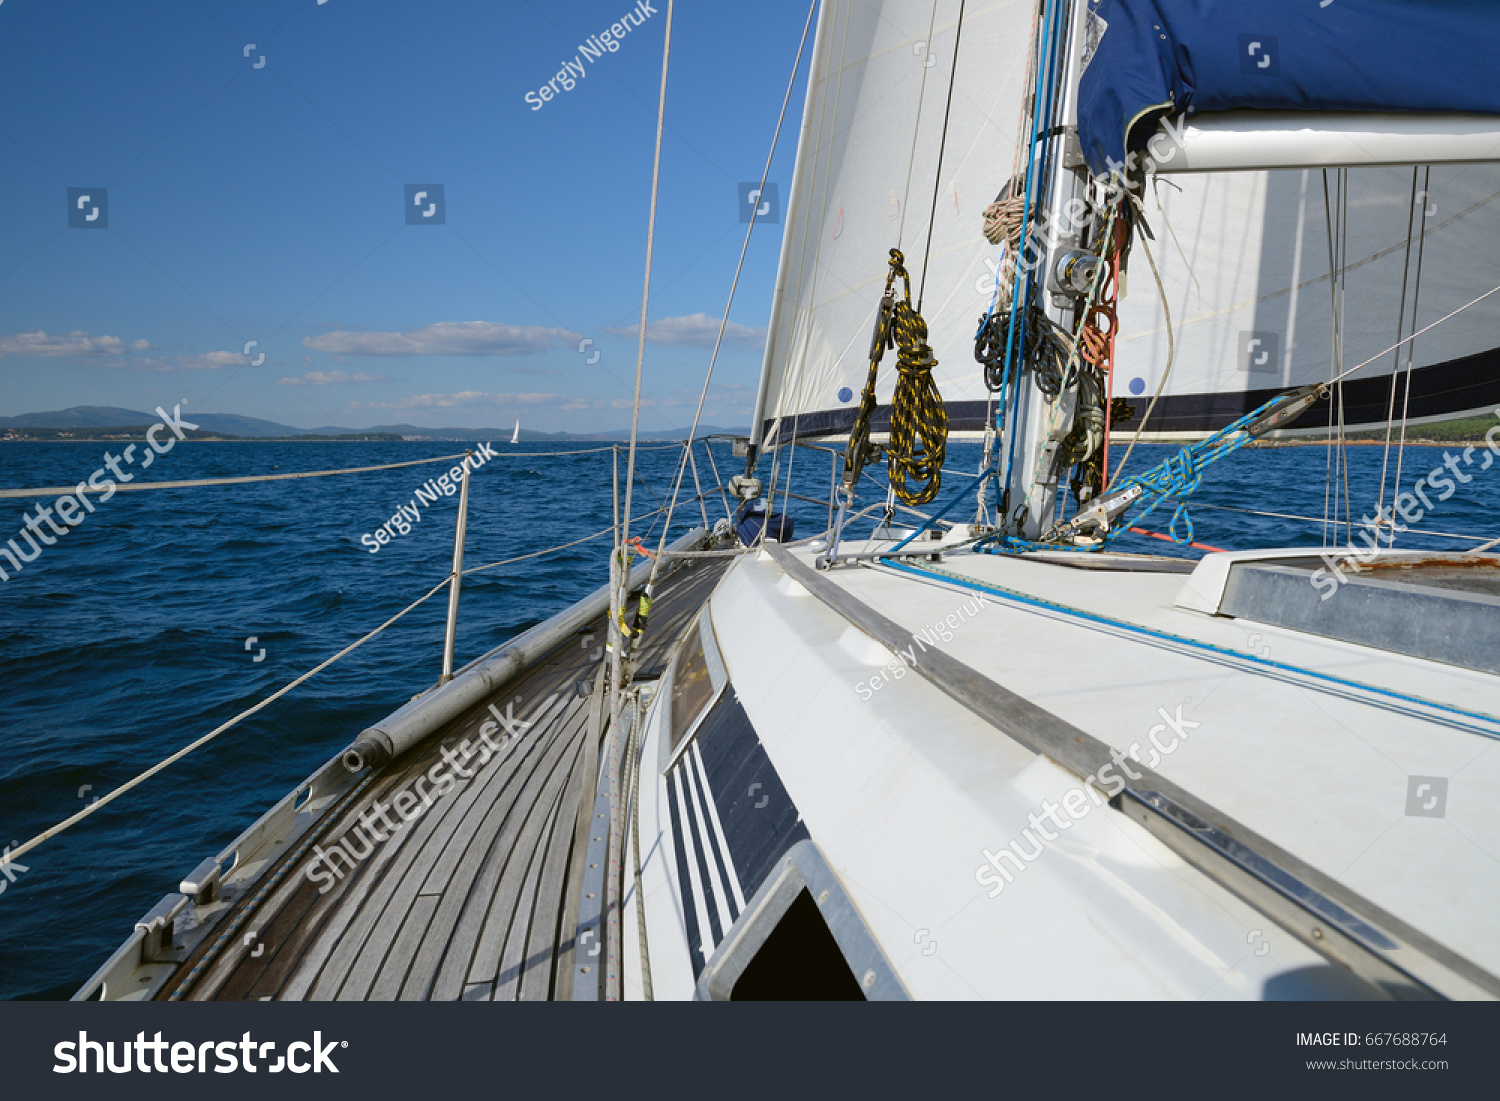 stock-photo-sea-view-from-sailing-yacht-667688764